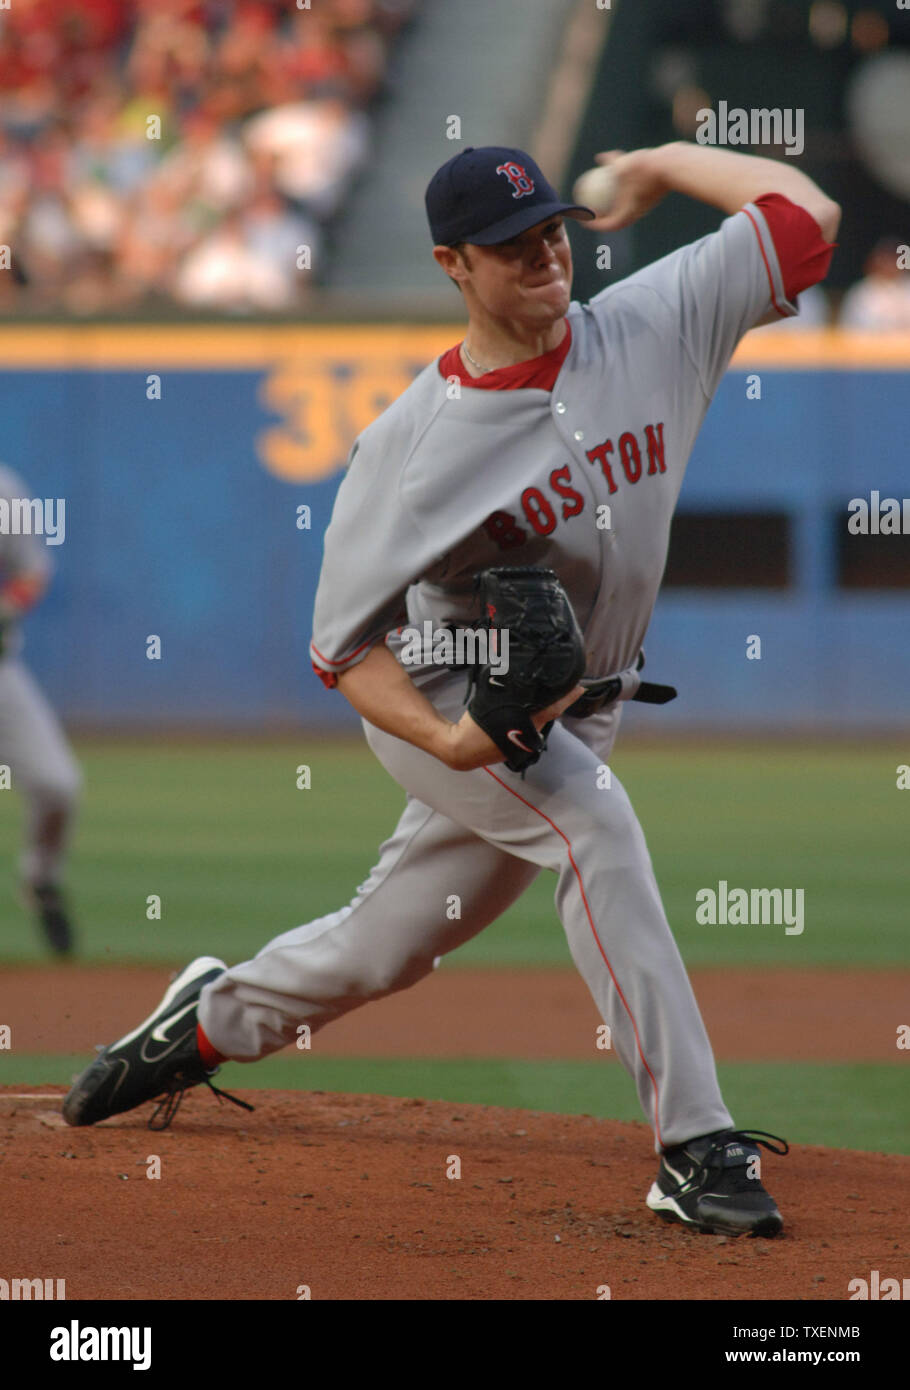 Boston Red Sox starting pitcher Jon Lester throws against the Atlanta Braves in the first inning of interleague play June 16, 2006, in Atlanta's Turner Field.  (UPI Photo/John Dickerson) Stock Photo